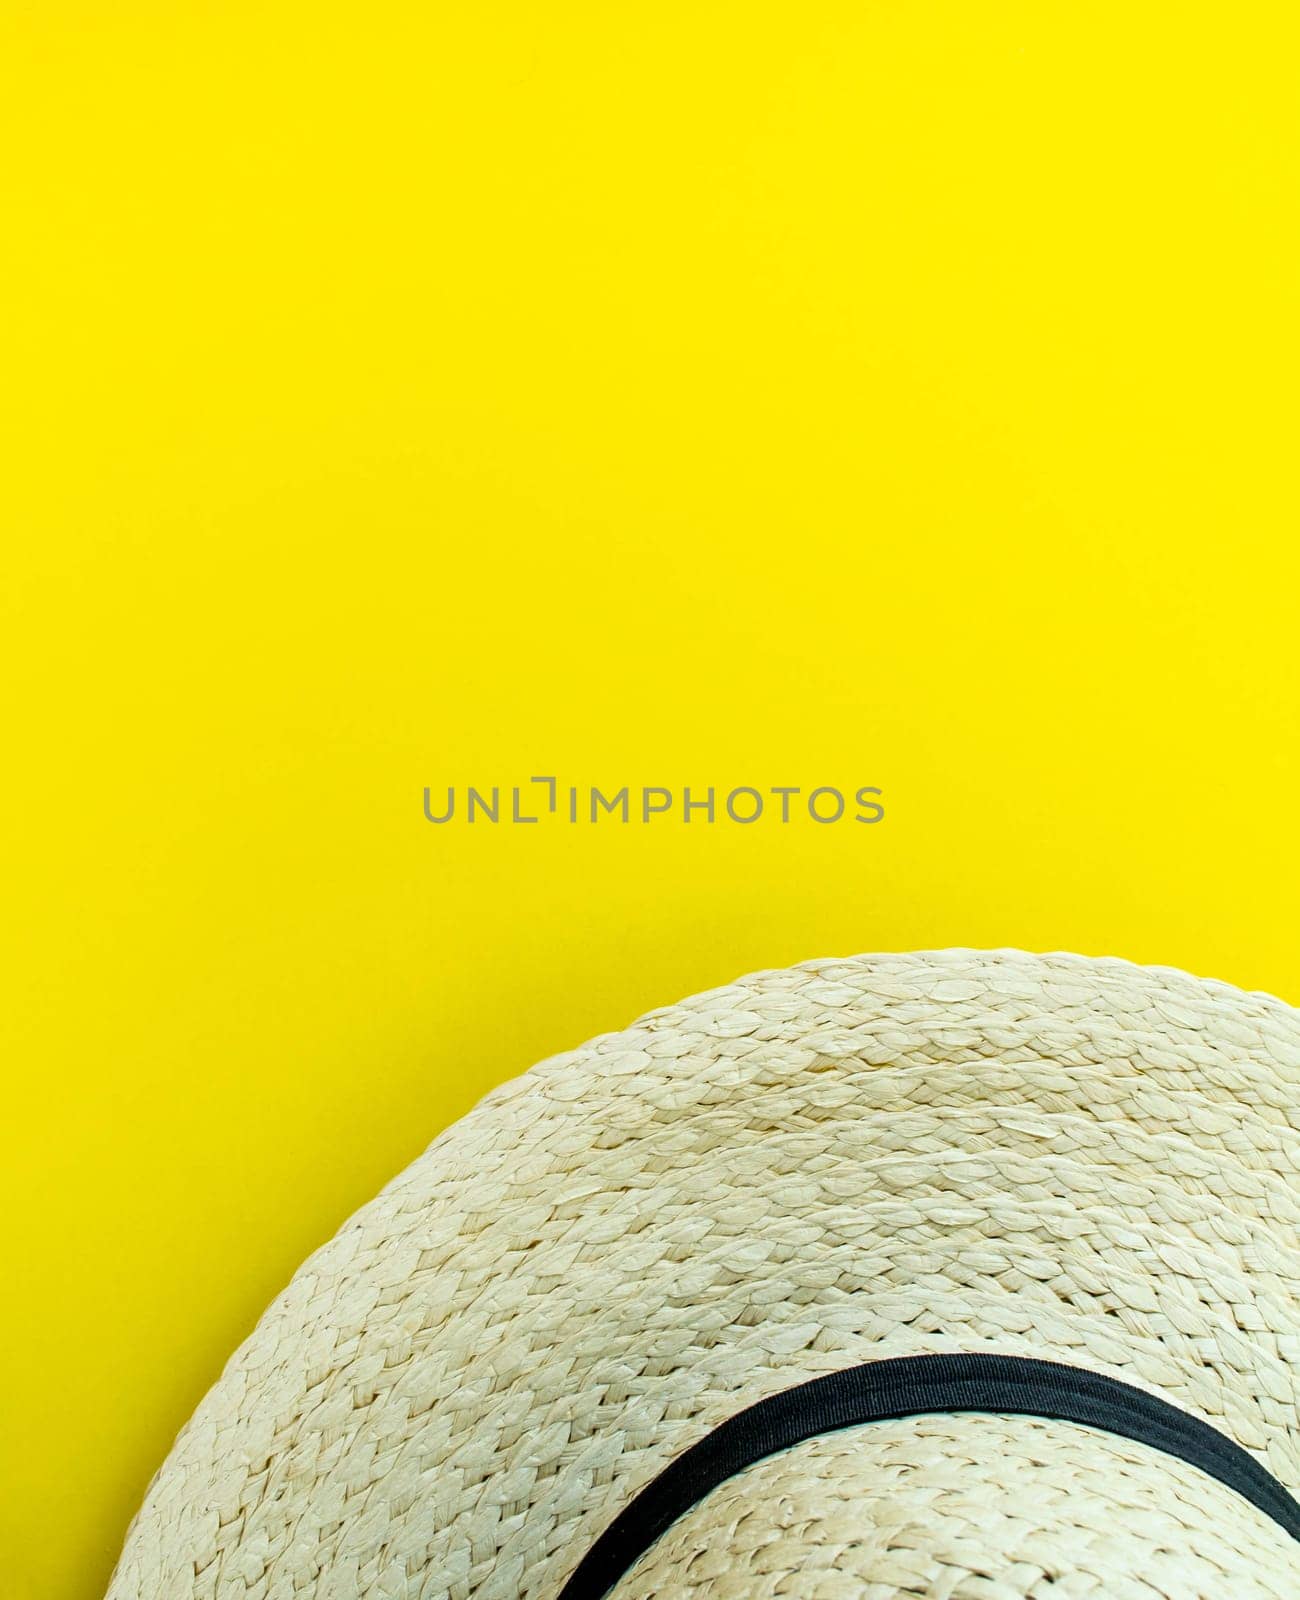 Flatlay, summer vacation. Straw hat on a yellow background. Vertical background.  by Yuka777